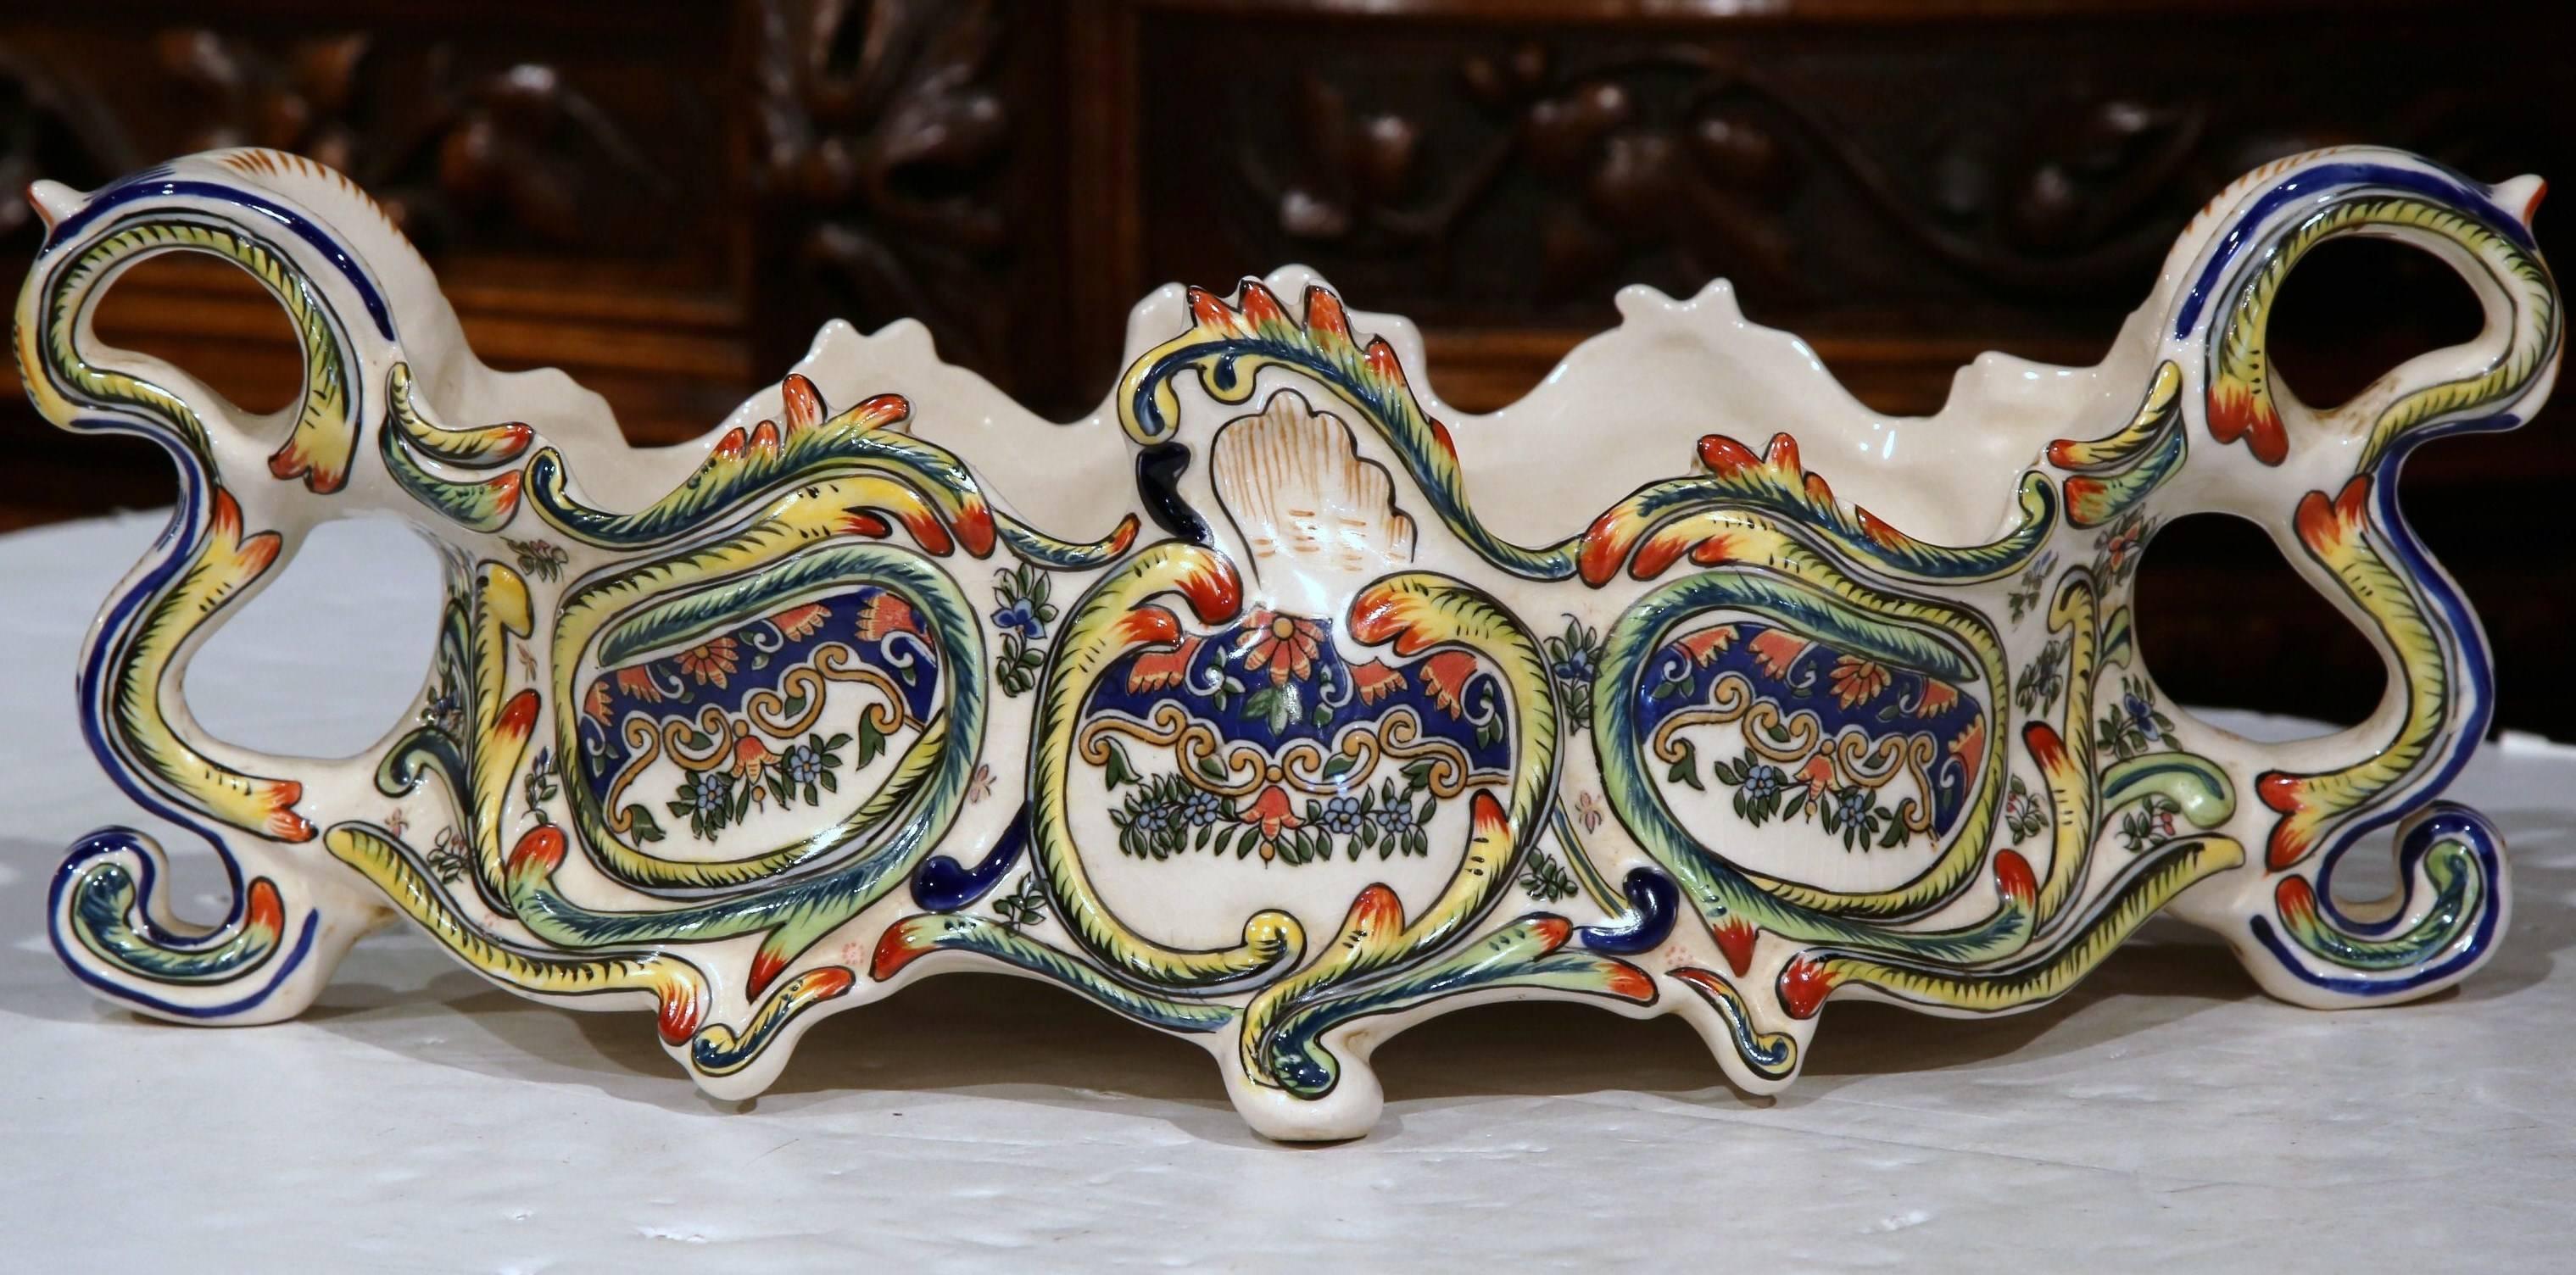 Decorate a table with this elegant, Louis XV jardinière from Rouen; crafted in northern France, circa 1870, this antique planter features an oblong shape with handles on both sides and expressive, sculpted intricate details. The piece is decorated